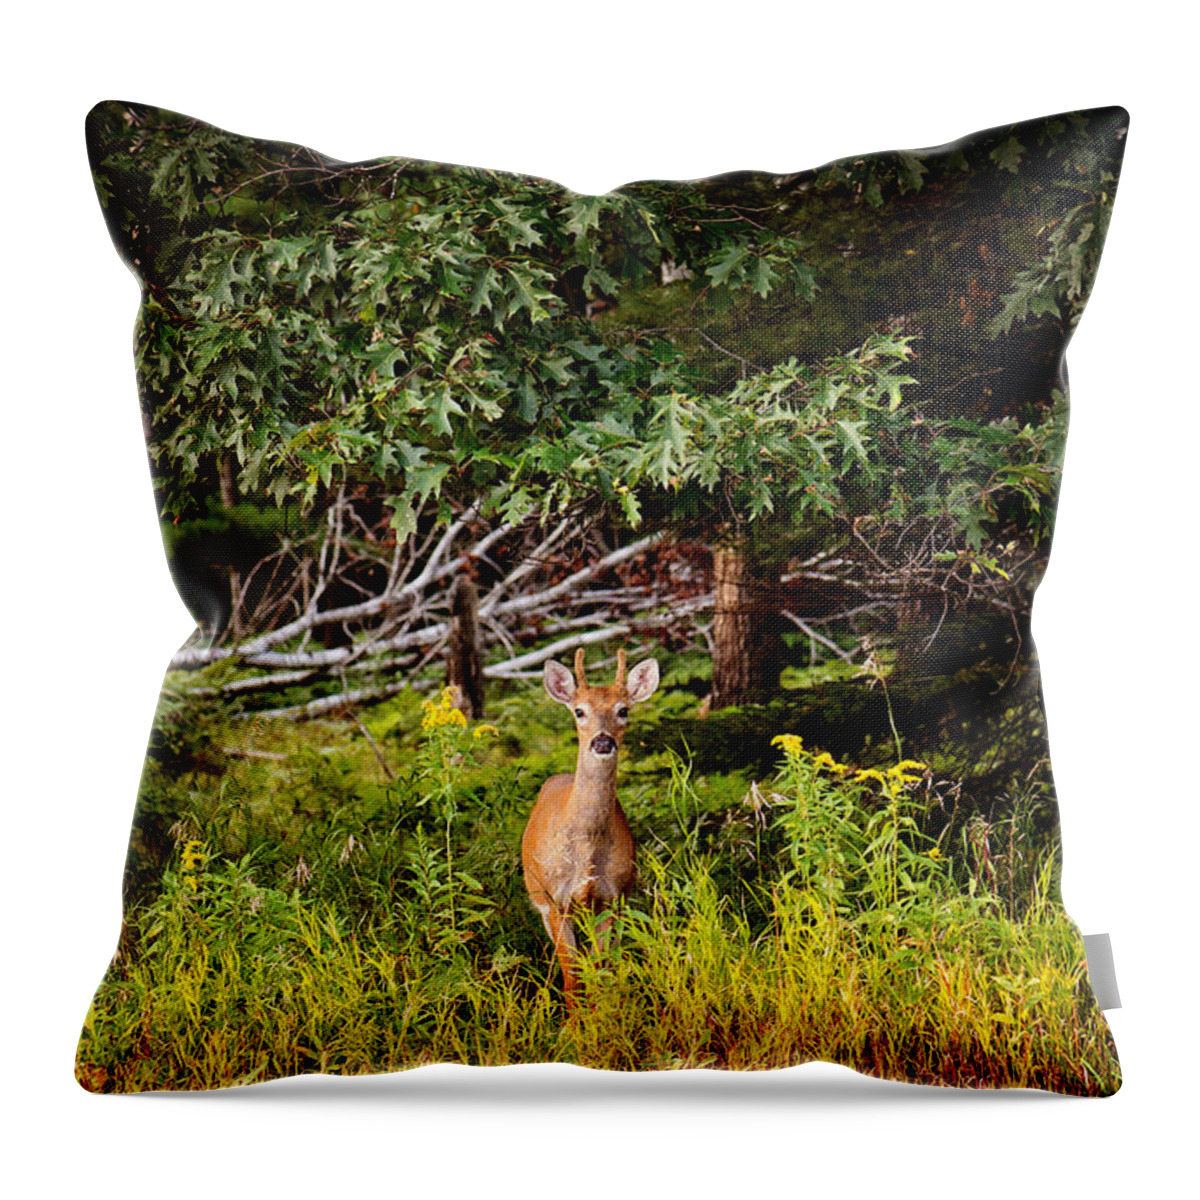 Whitetail Deer Print Throw Pillow featuring the photograph Whitetail Deer Print by Gwen Gibson